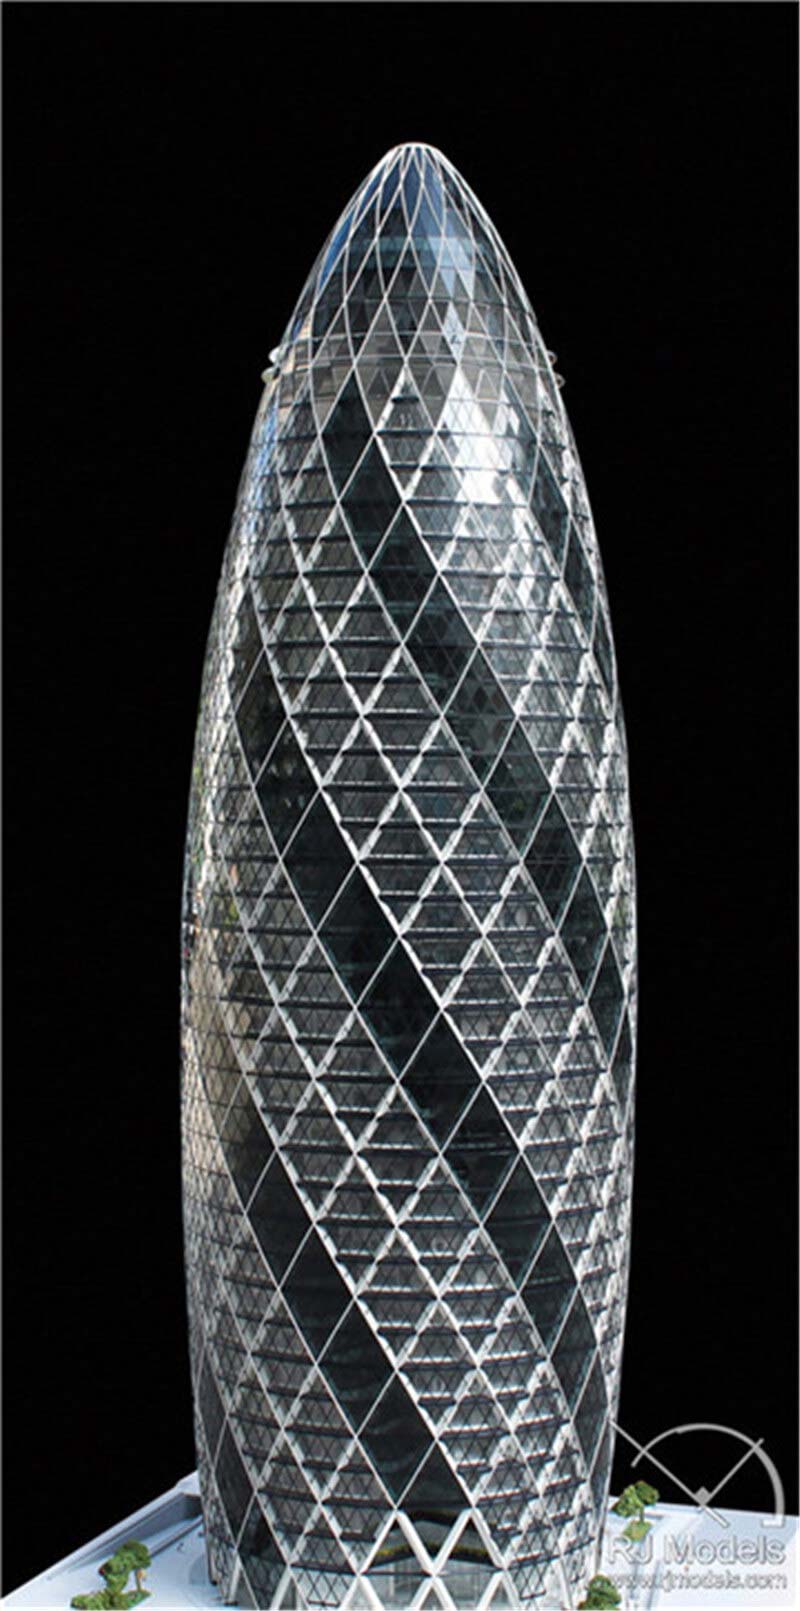 The delicate and exquisite model of The Gherkin